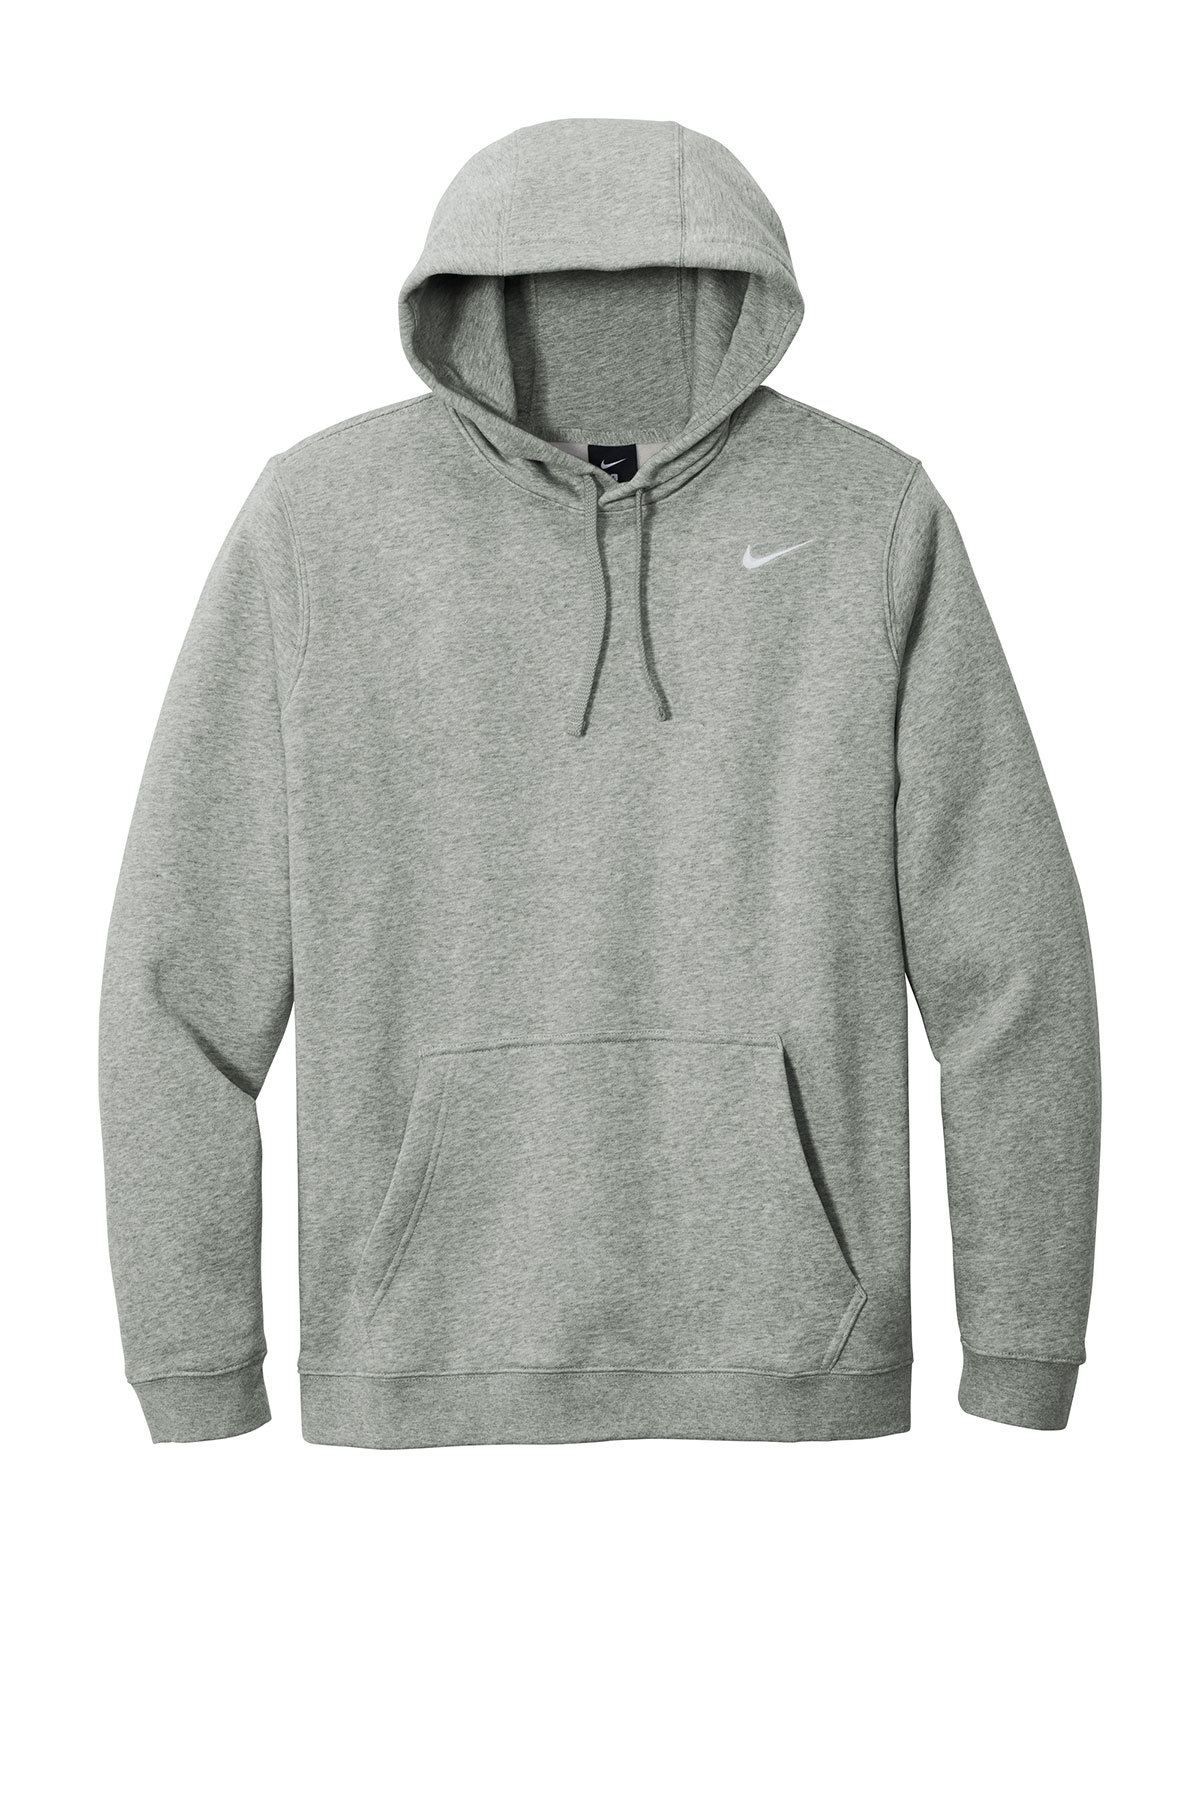 Nike Club Fleece Pullover Hoodie | Product | Company Casuals